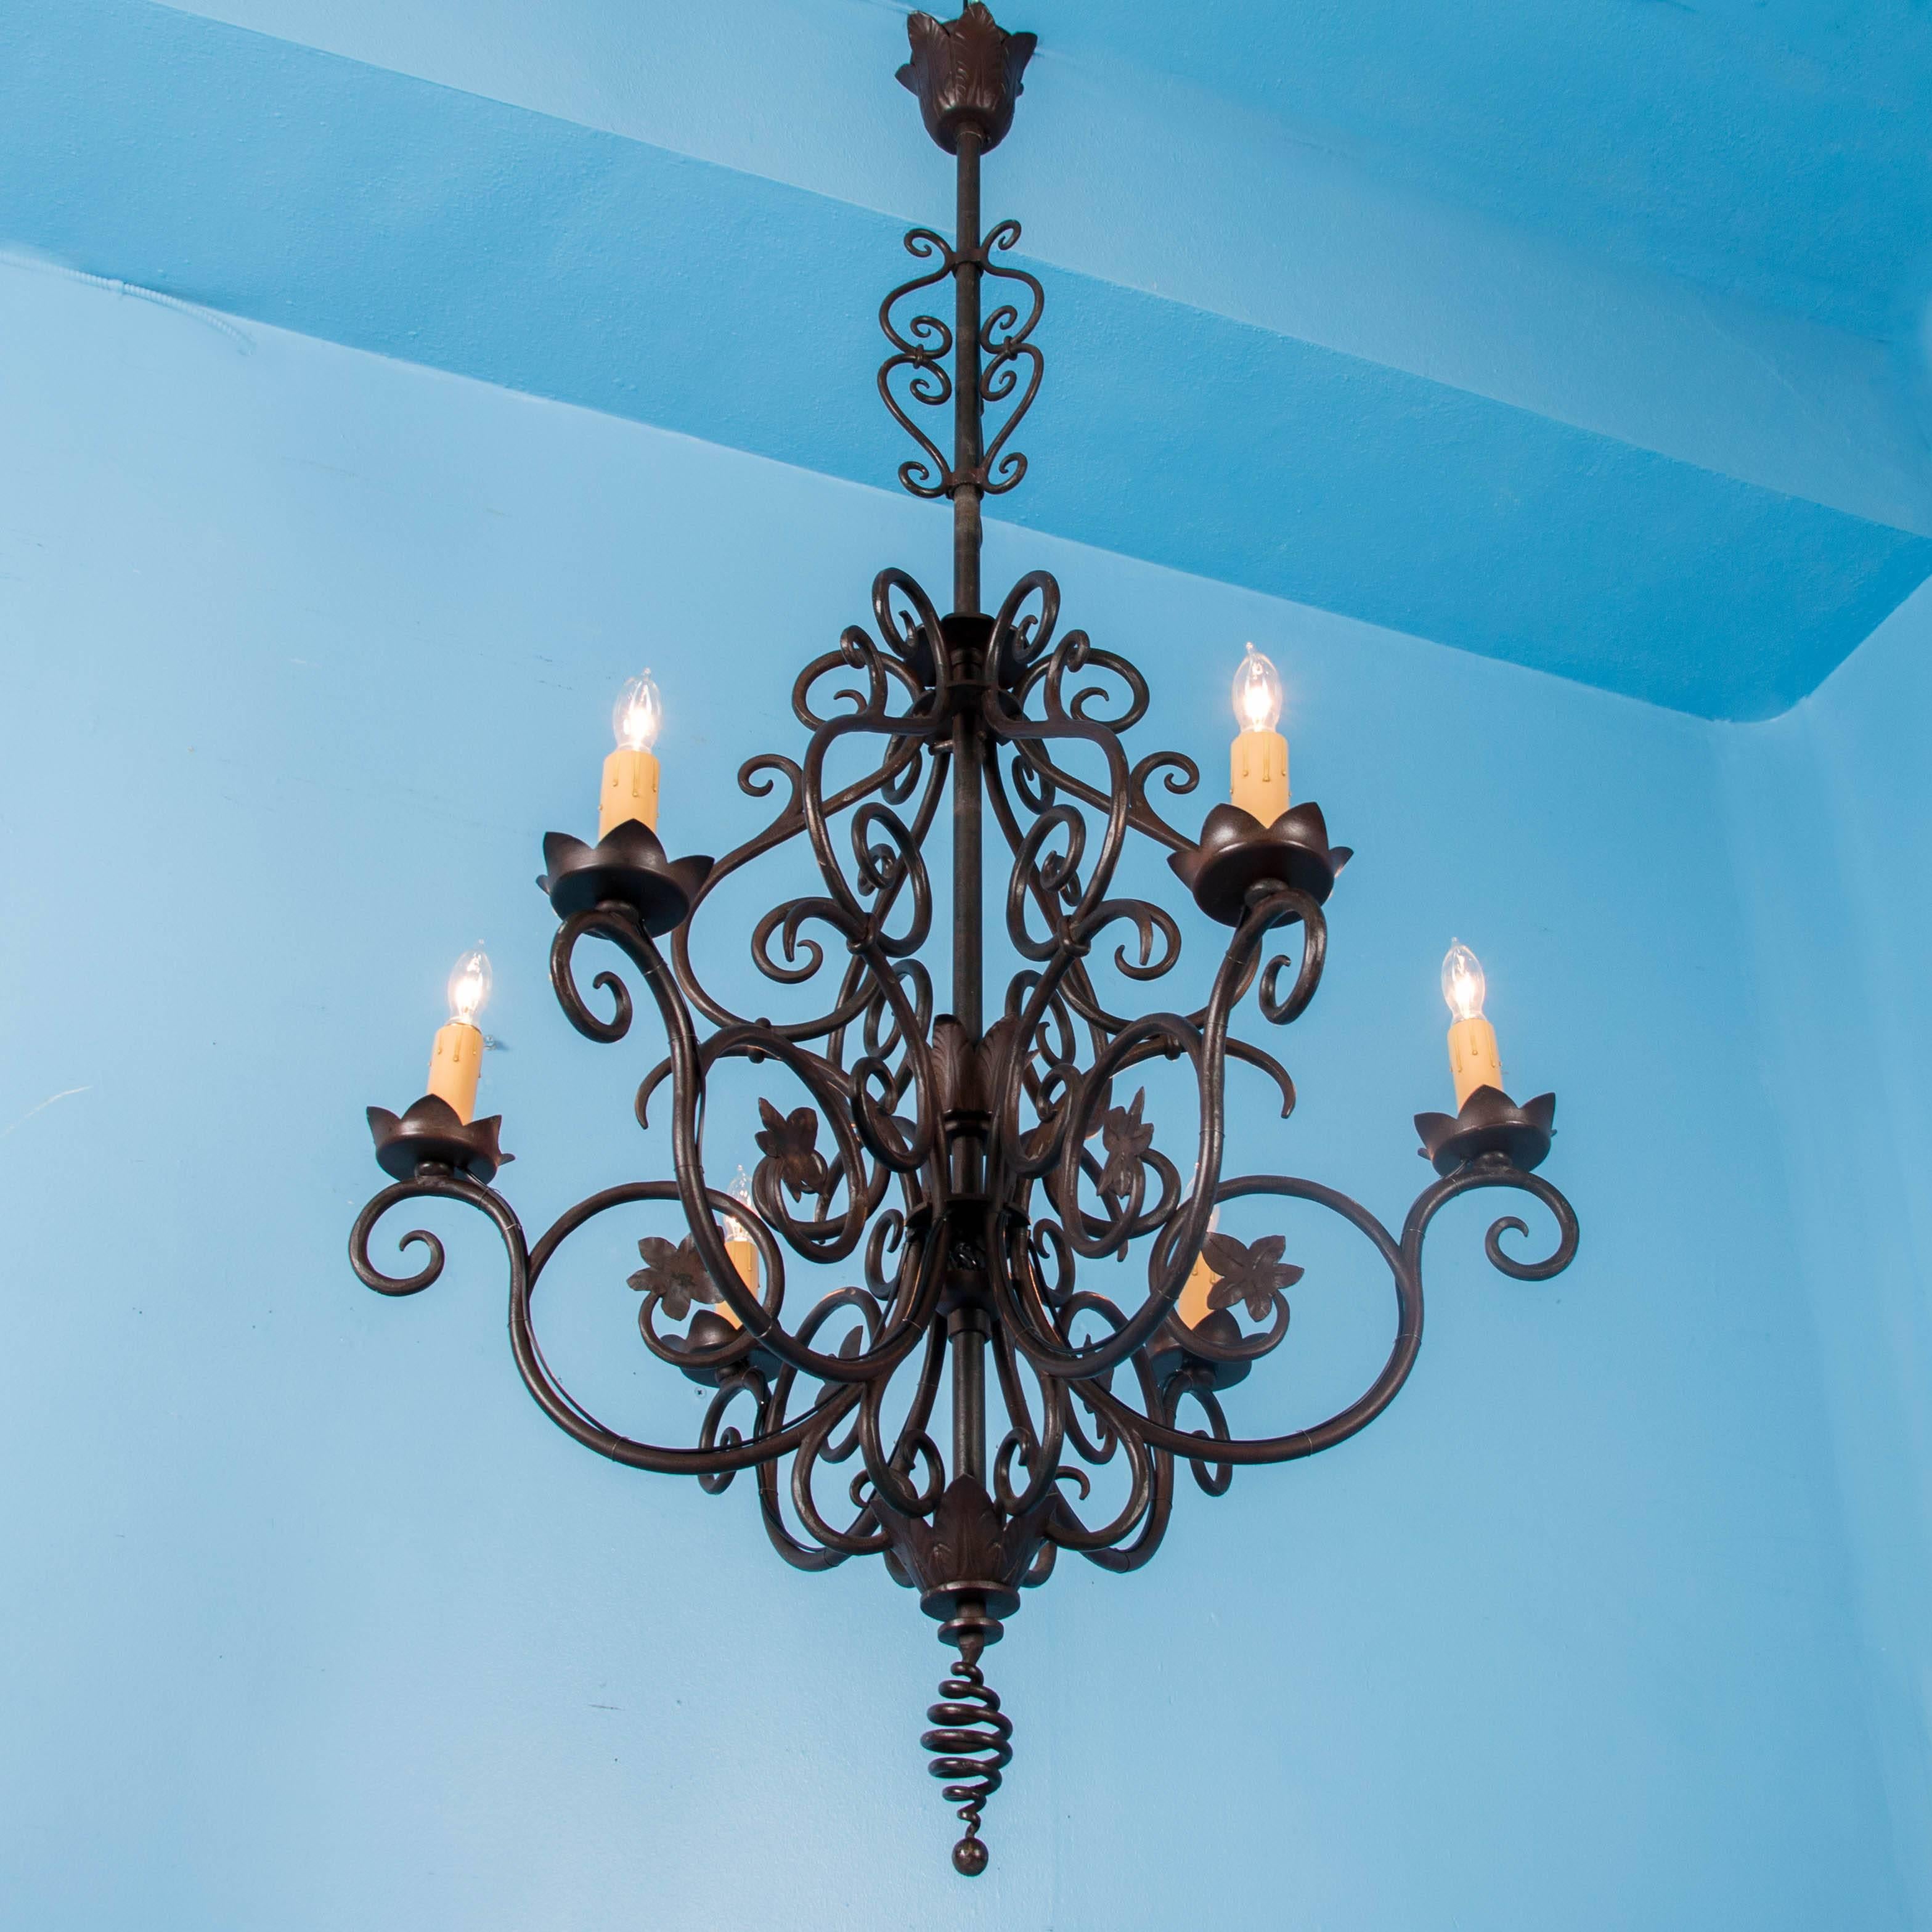 This large antique wrought iron chandelier features a long central rod supporting the six ornate scrolled arms and applied leaf details. Each of the six sockets are covered with a candle cover which rests on a round leaf drip pan. The chandelier has